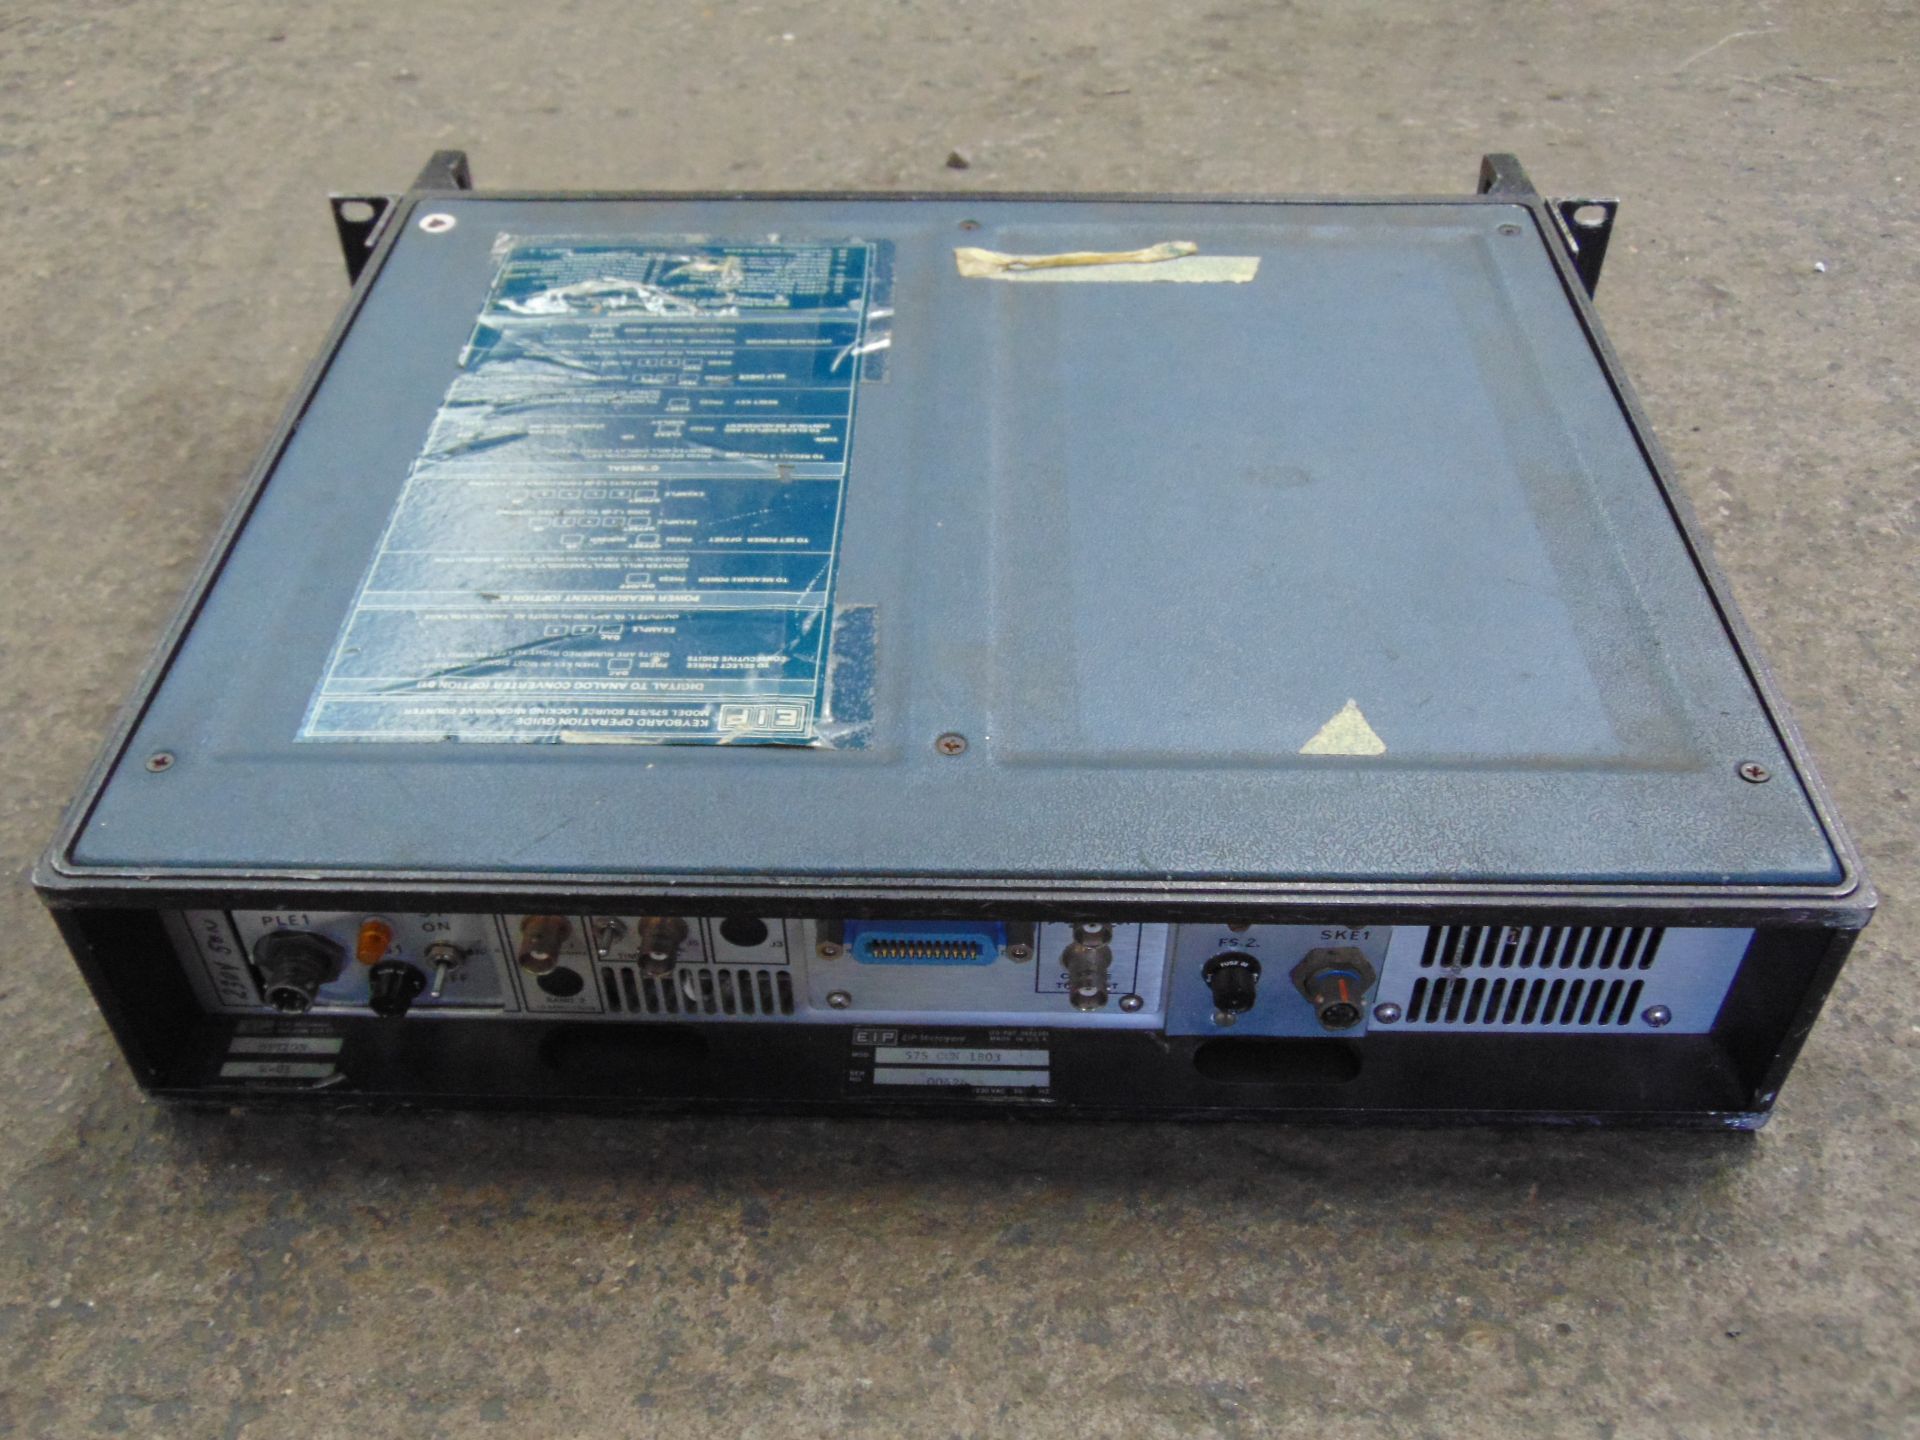 EIP Model 575 Source Locking Microwave Counter - Image 6 of 11